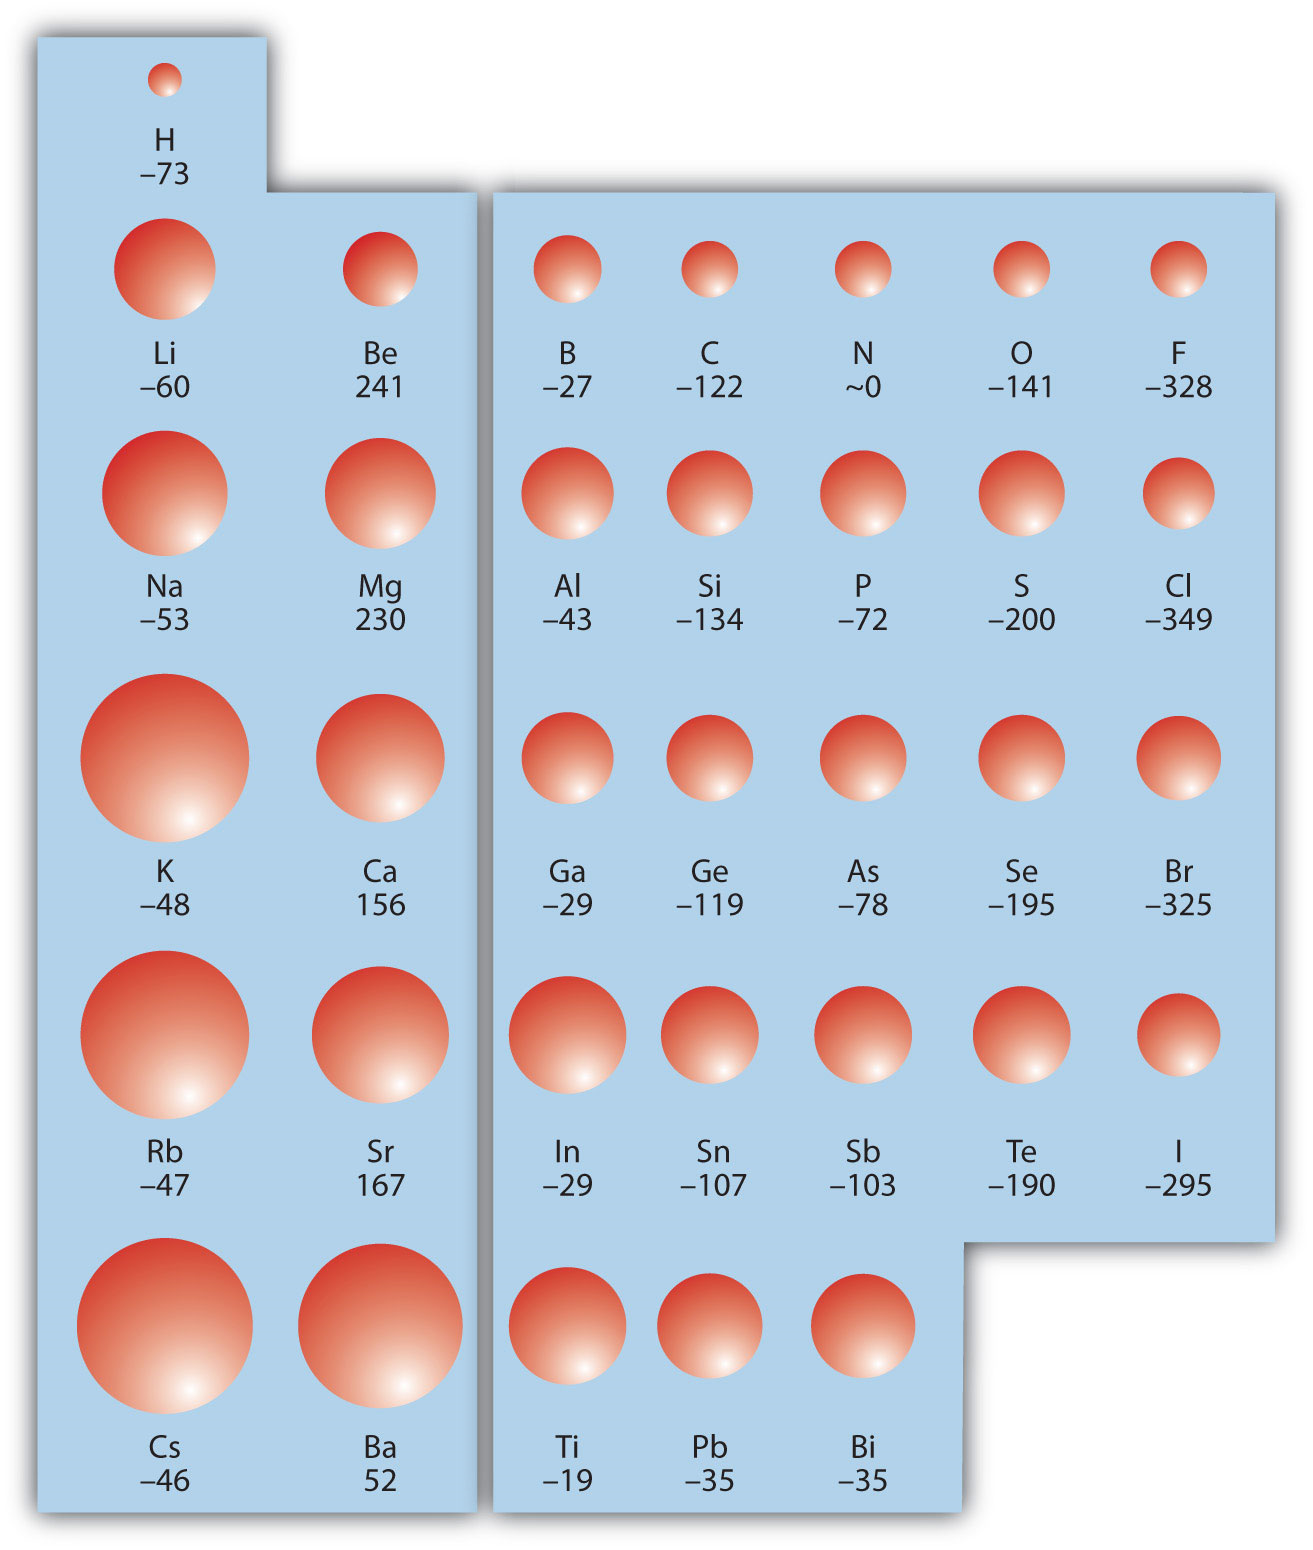 Electron affinity on the periodic table.